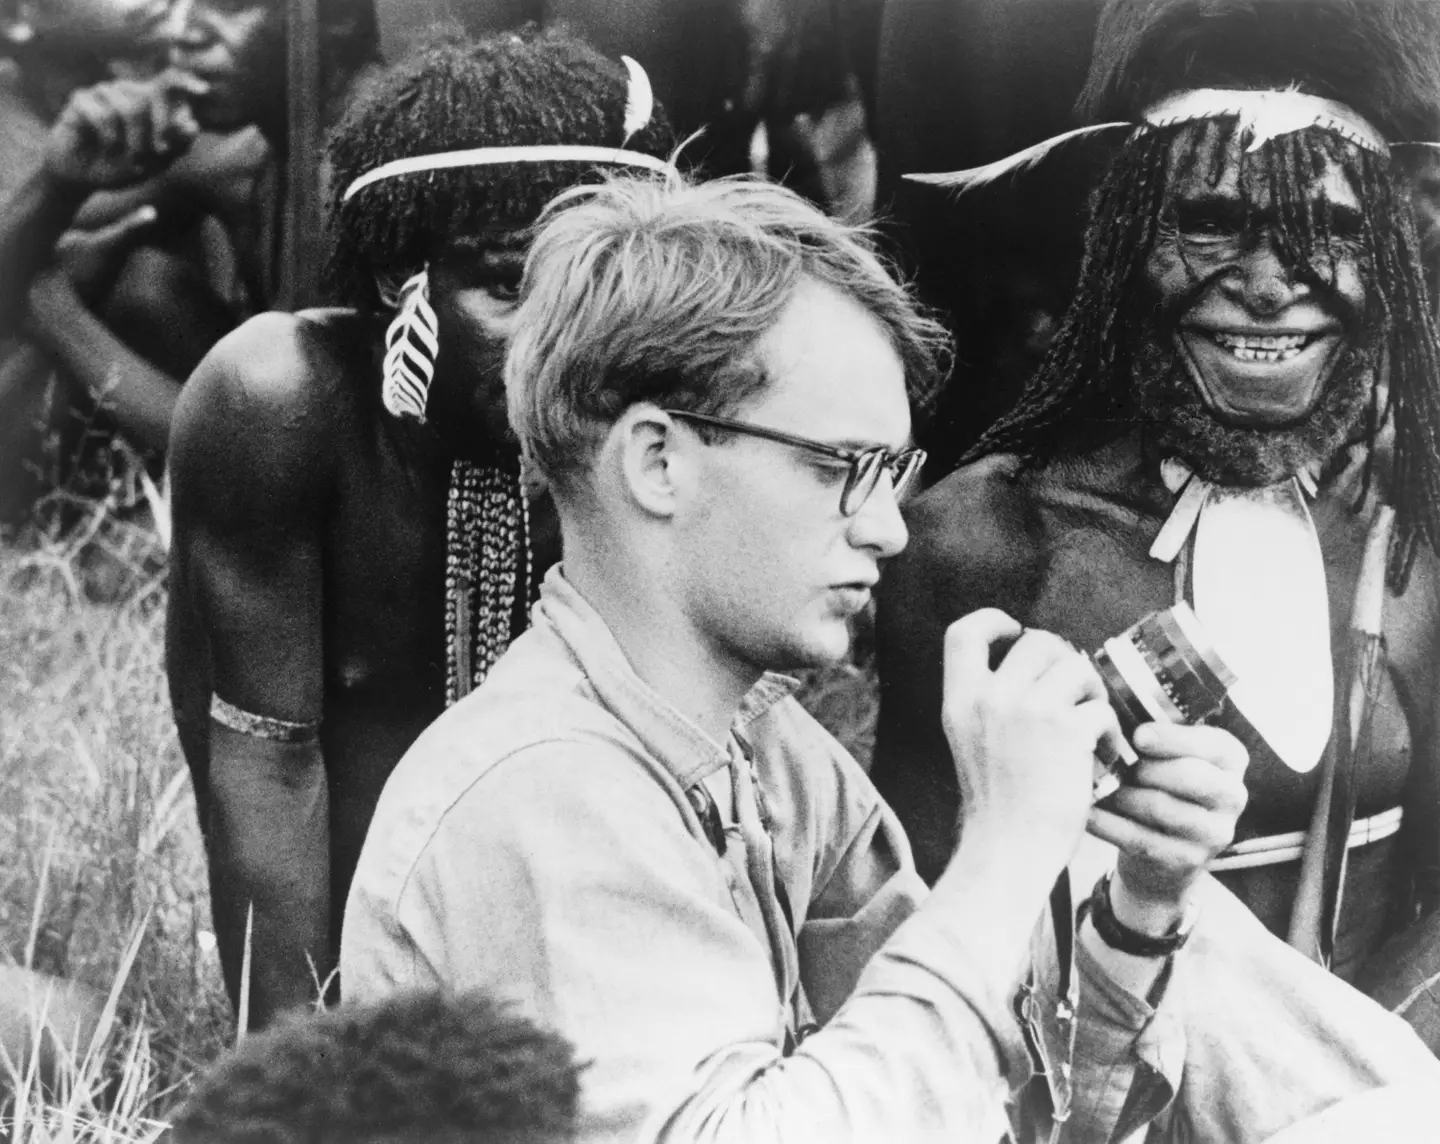 Michael C. Rockefeller (1934-1961) adjusting his camera in New Guinea, Papuan men in background. This is one of the last pictures of him alive. (Everett Collection Inc/Alamy Stock Photo)